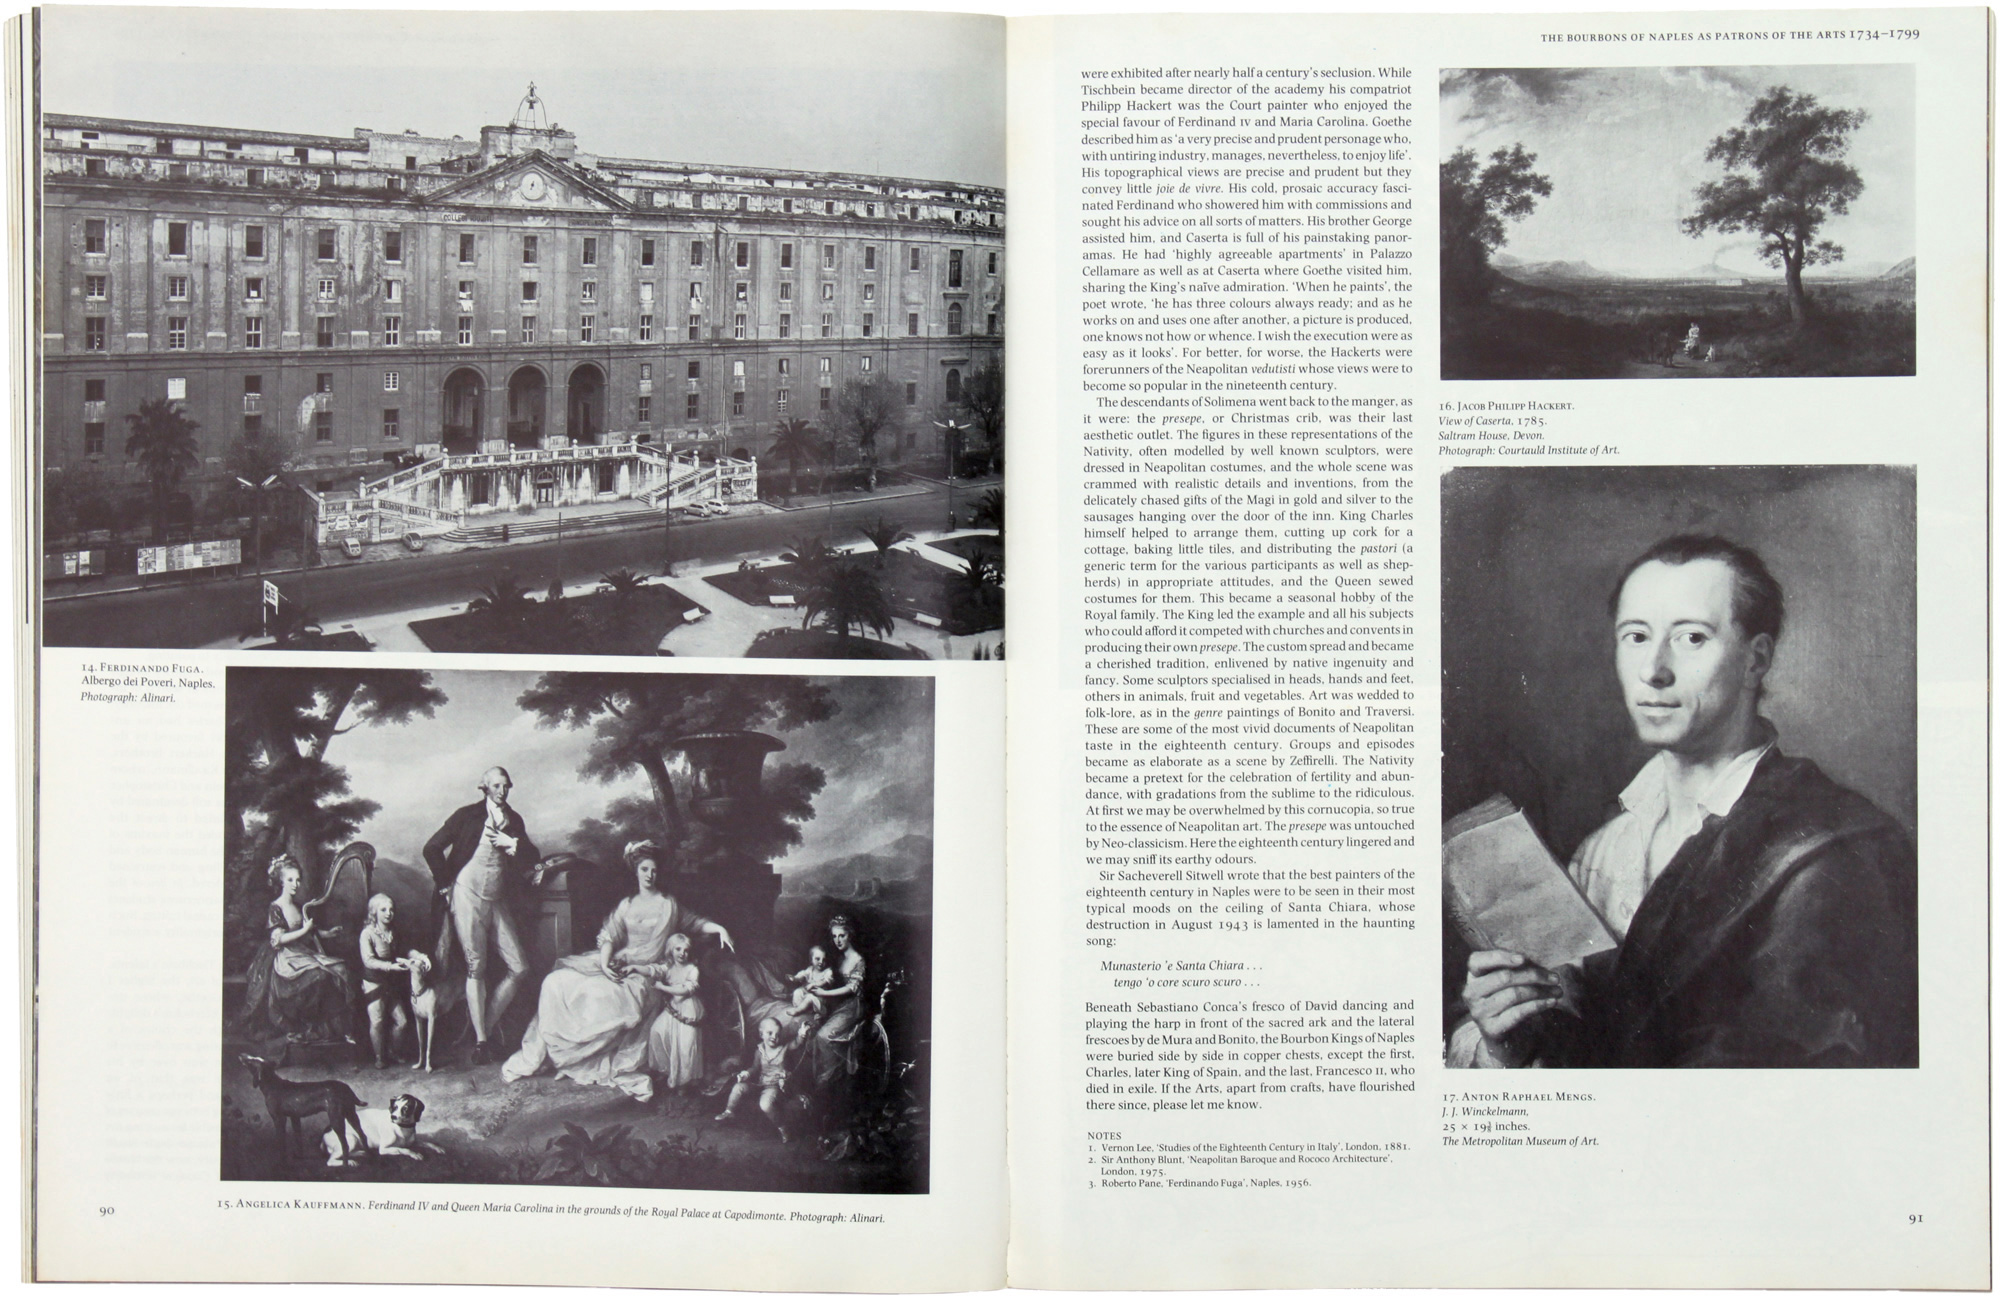 The CONNOISSEUR back issues - October 1977 - The Bourbons of Naples as patrons of the Arts by Harold Acton Pages 90,91 - Back To List of Art Magazines